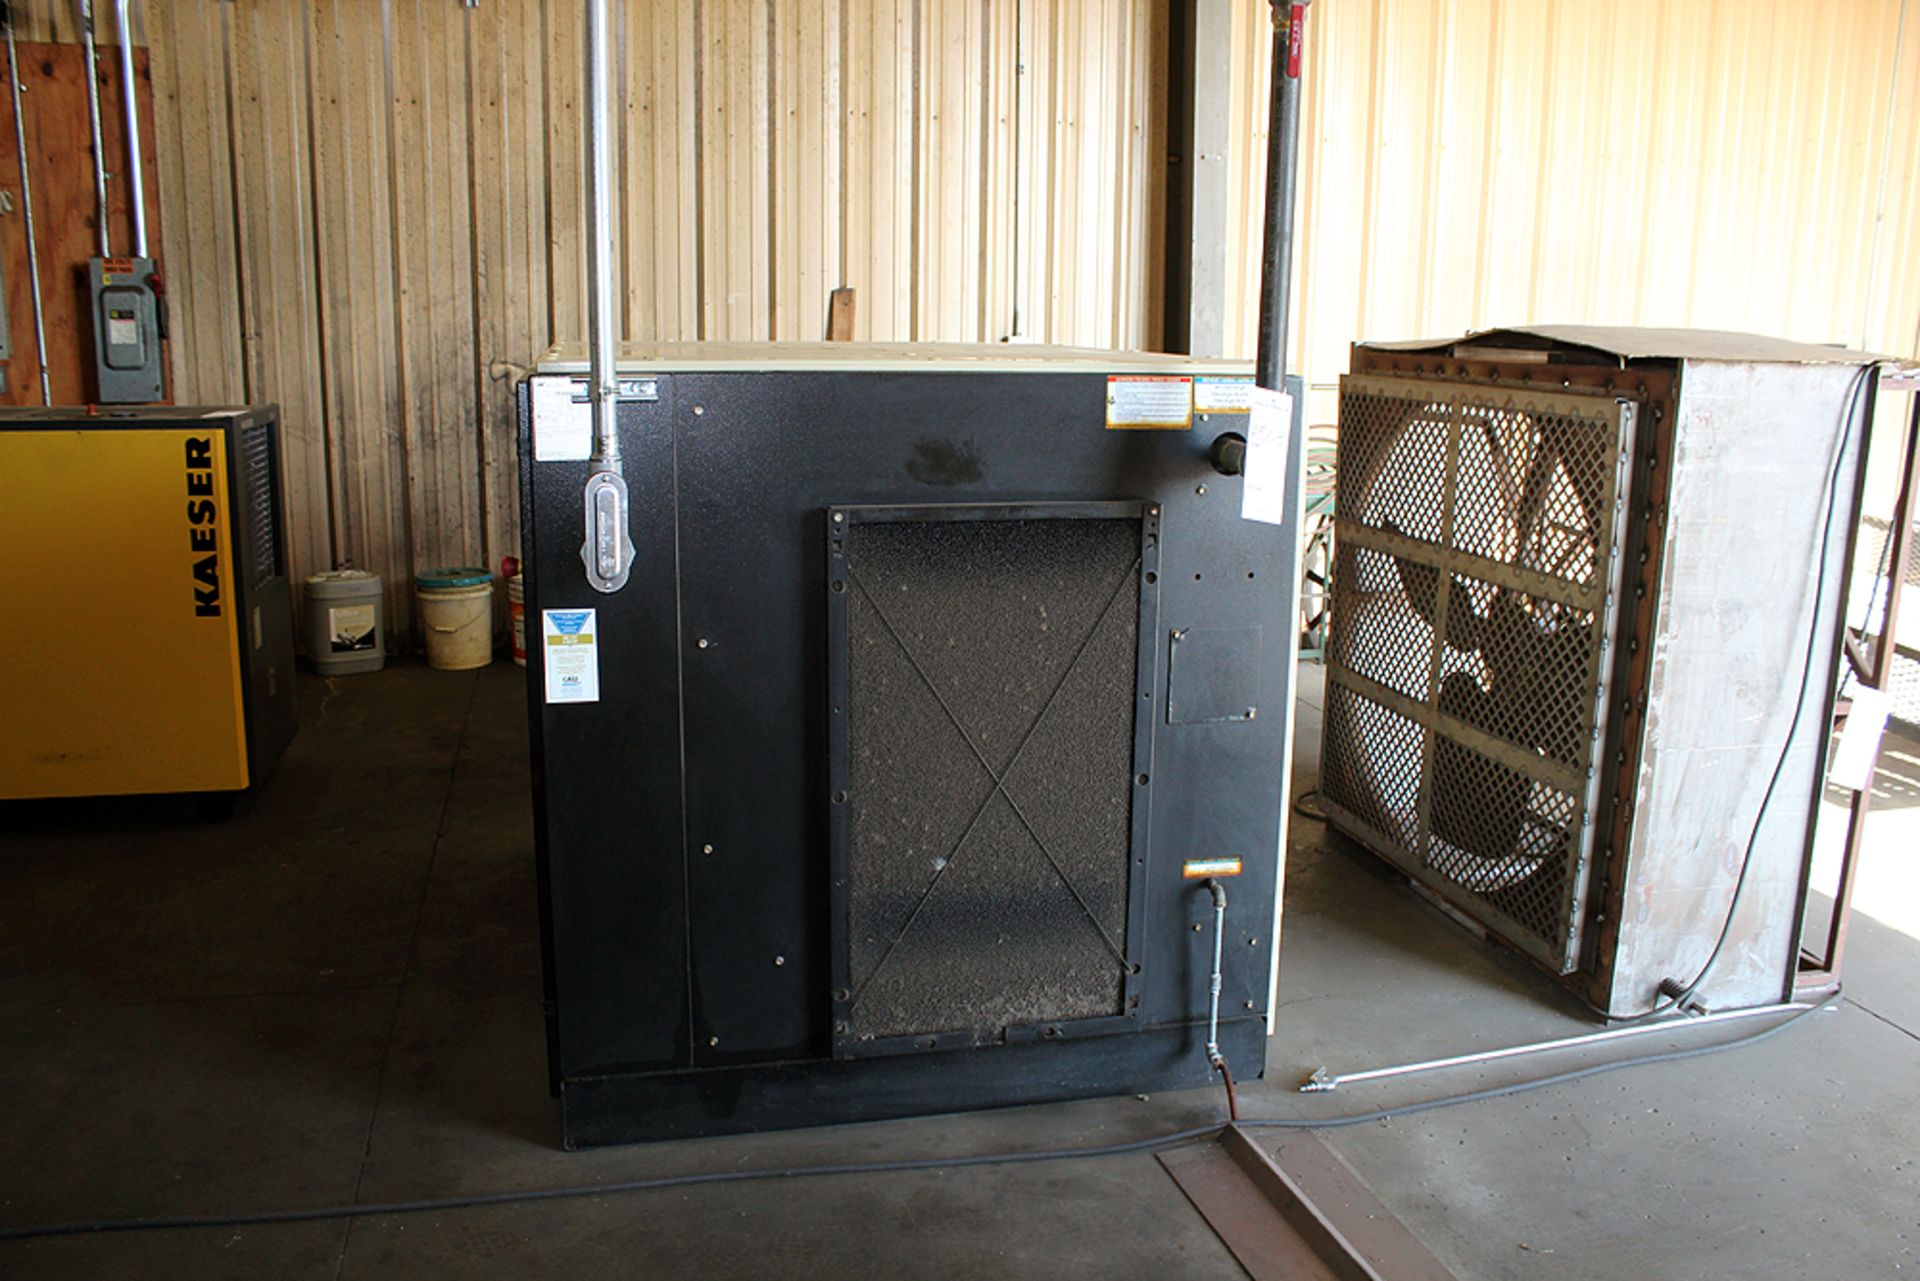 2015 Ingersoll Rand Rotary Screw Air Compressor Model #UP6-50PE-150, 7000 hours, serviced Feb. 2020 - Image 2 of 4